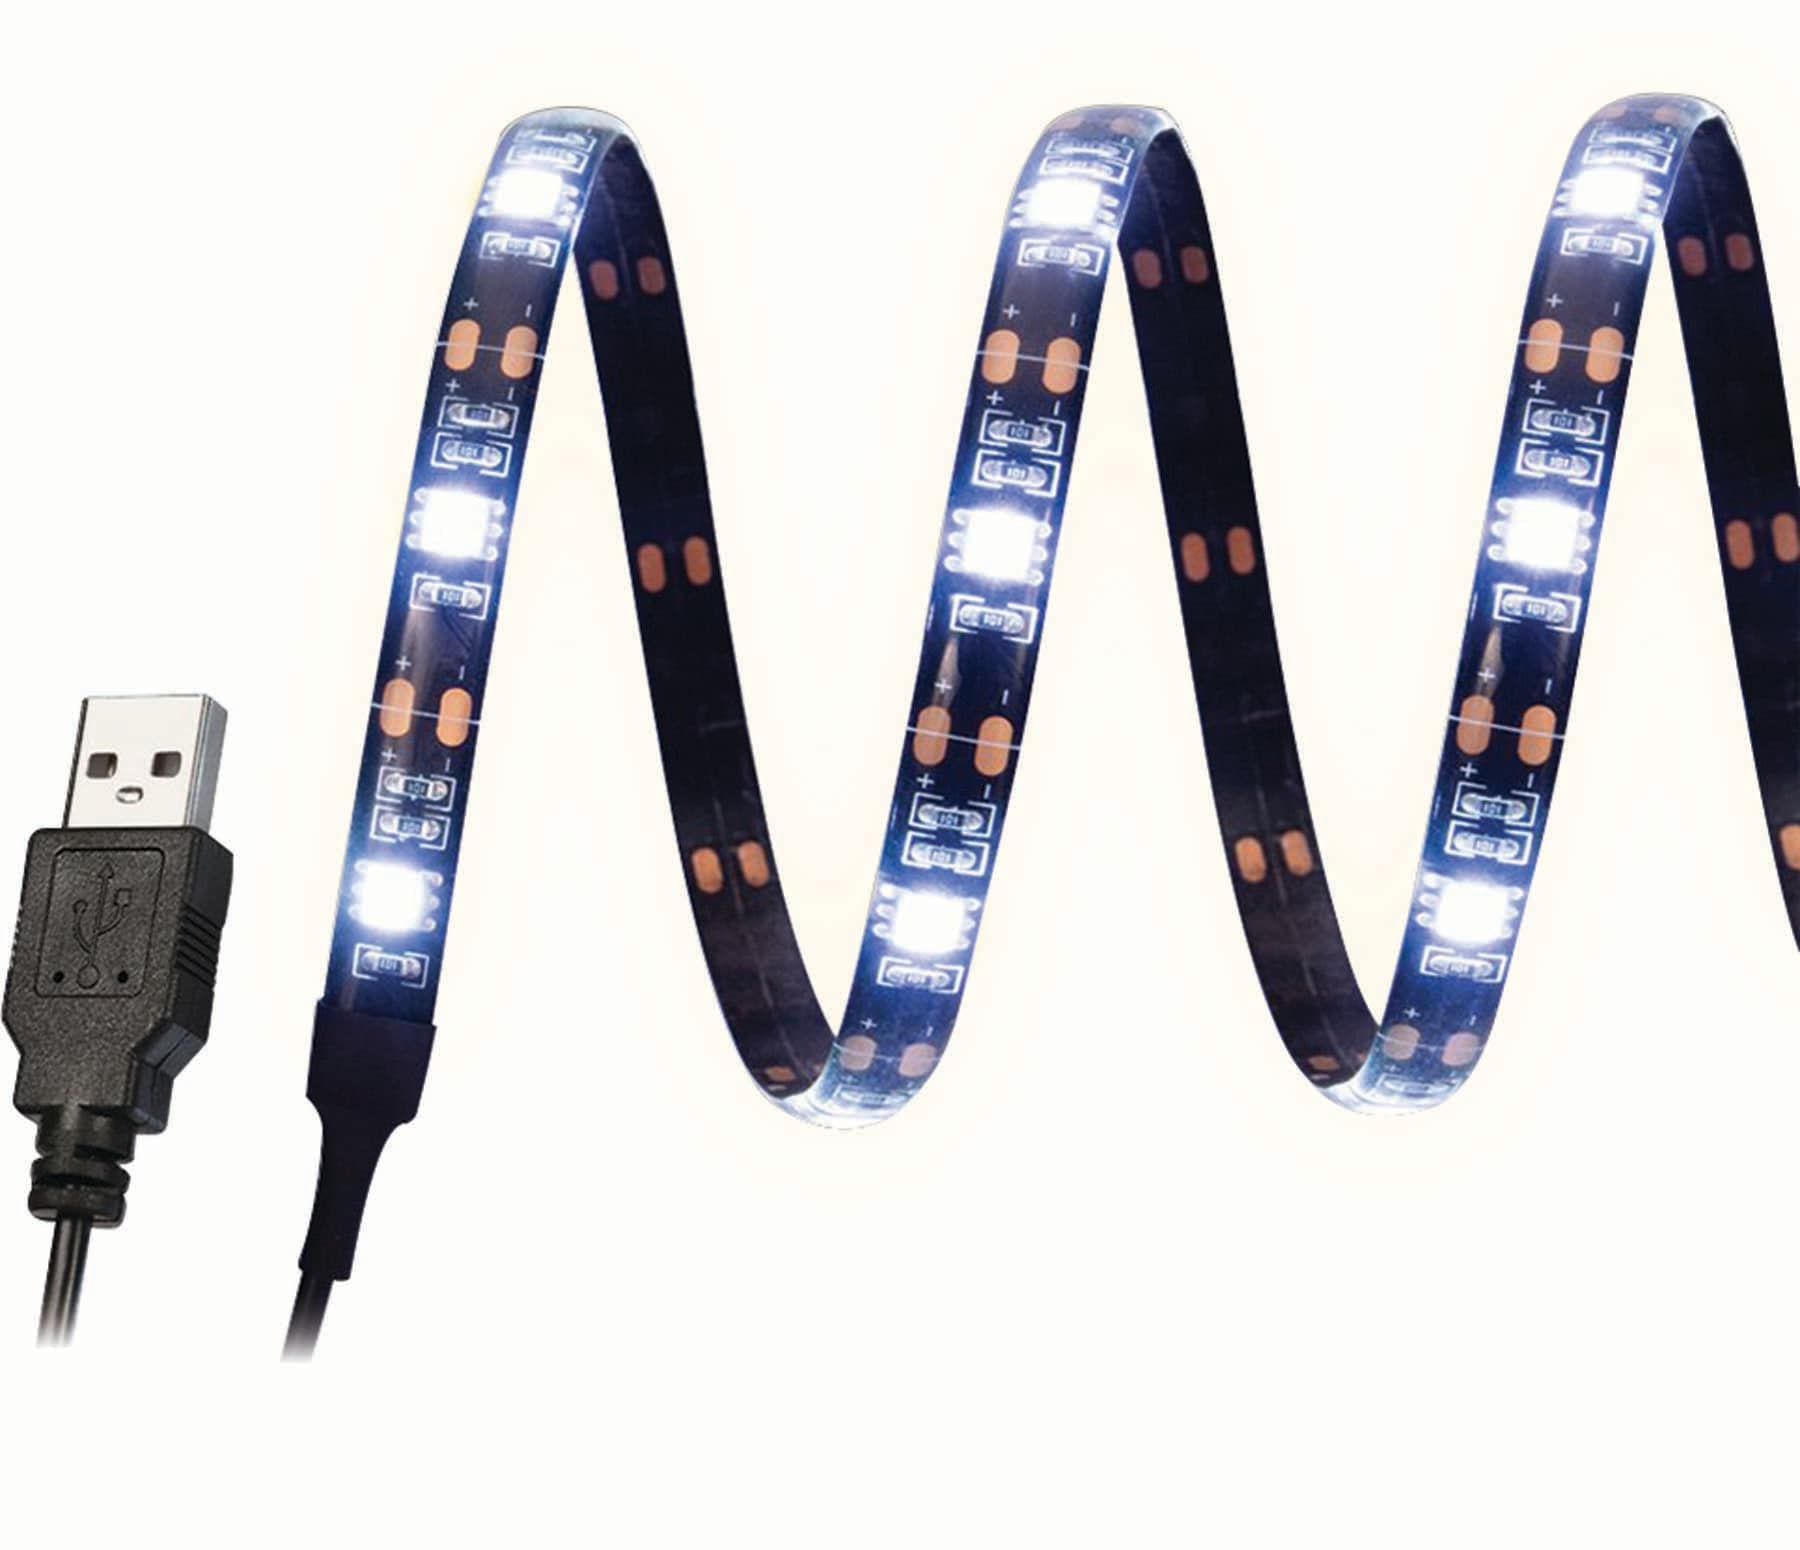 Hype 12FT Black Light USB LED Flexible Light Strip - Energy Efficient -  Black - Easy to Install - Great for Parties - Flexible Backing in the Strip  Lights department at